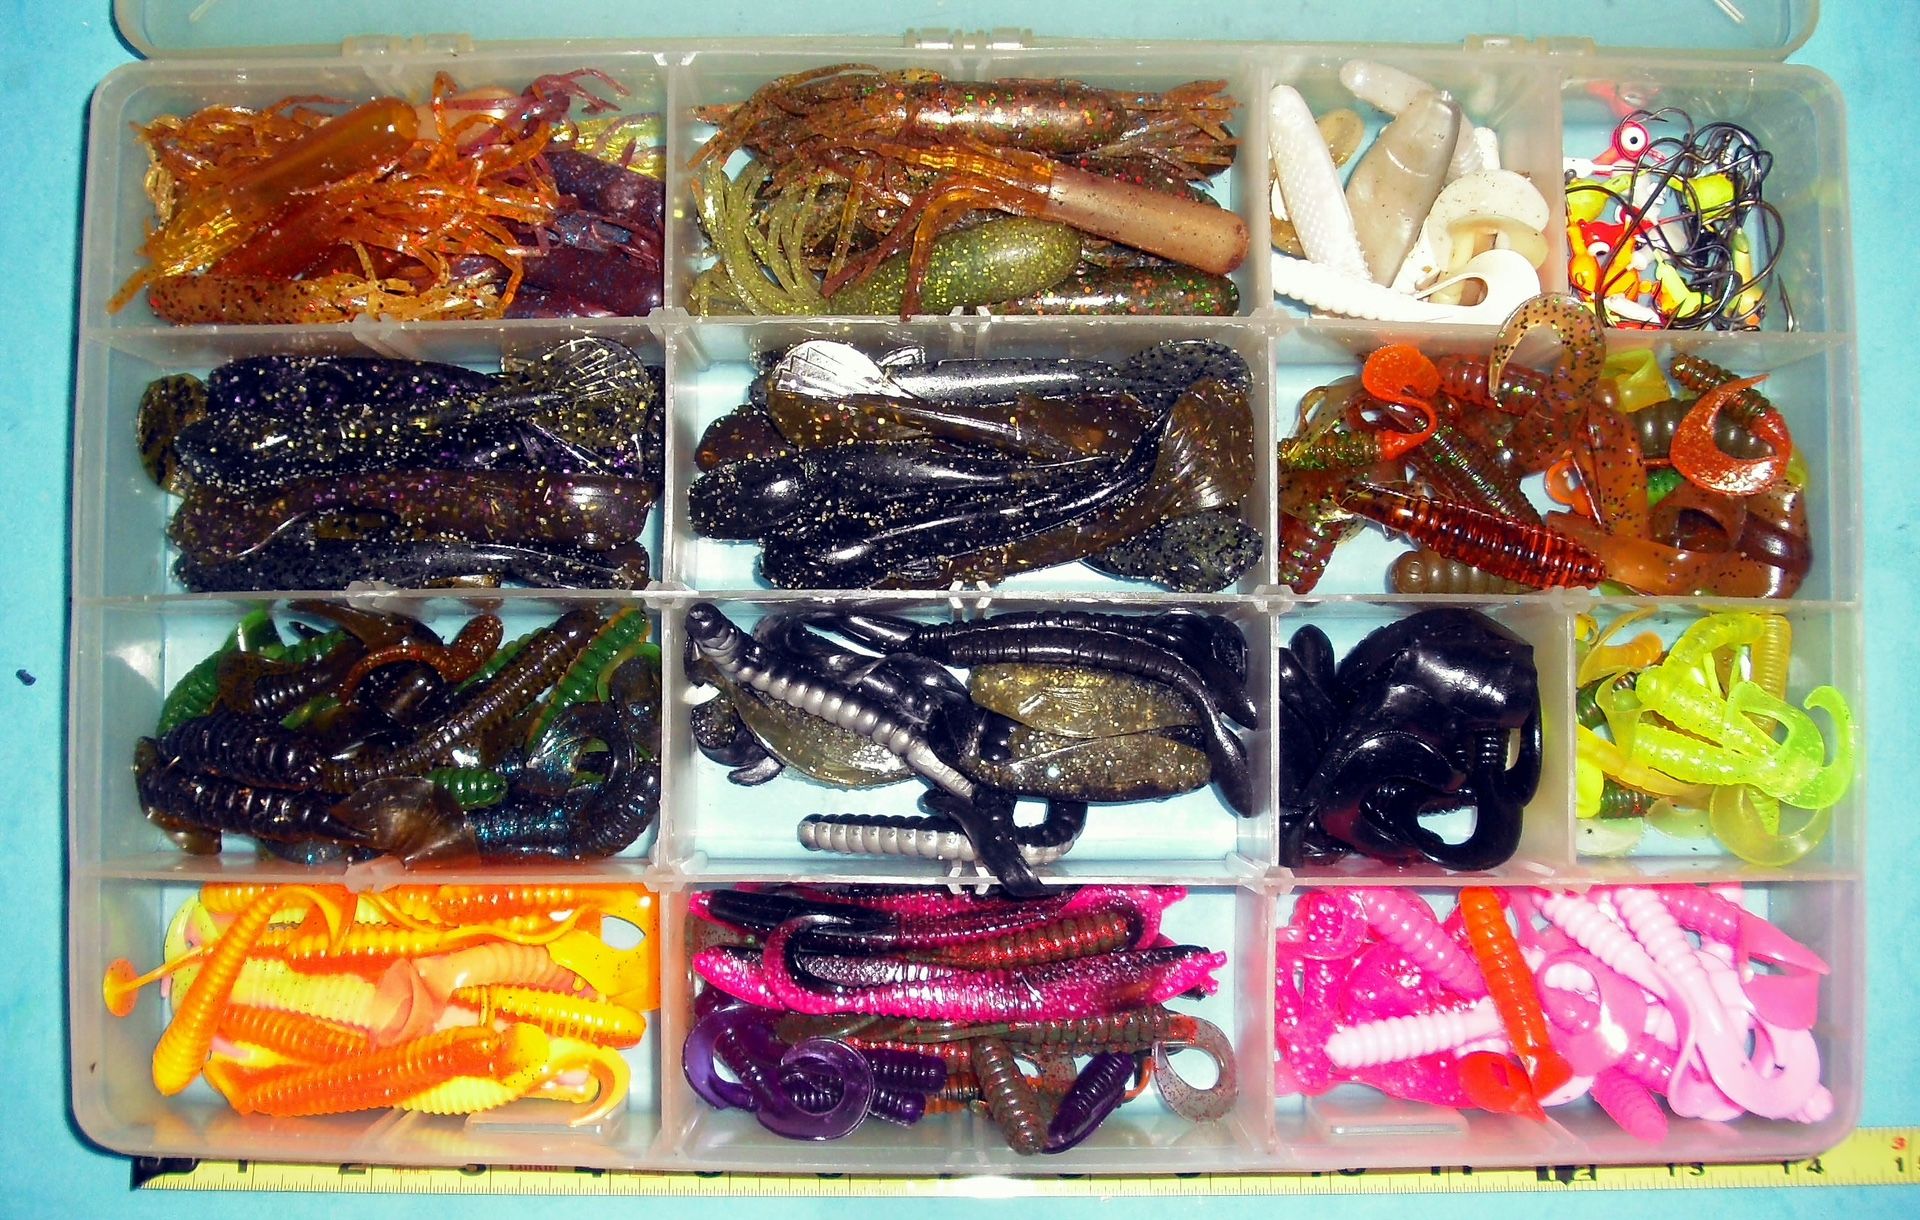 Soft Bait Fishing Lures for sale